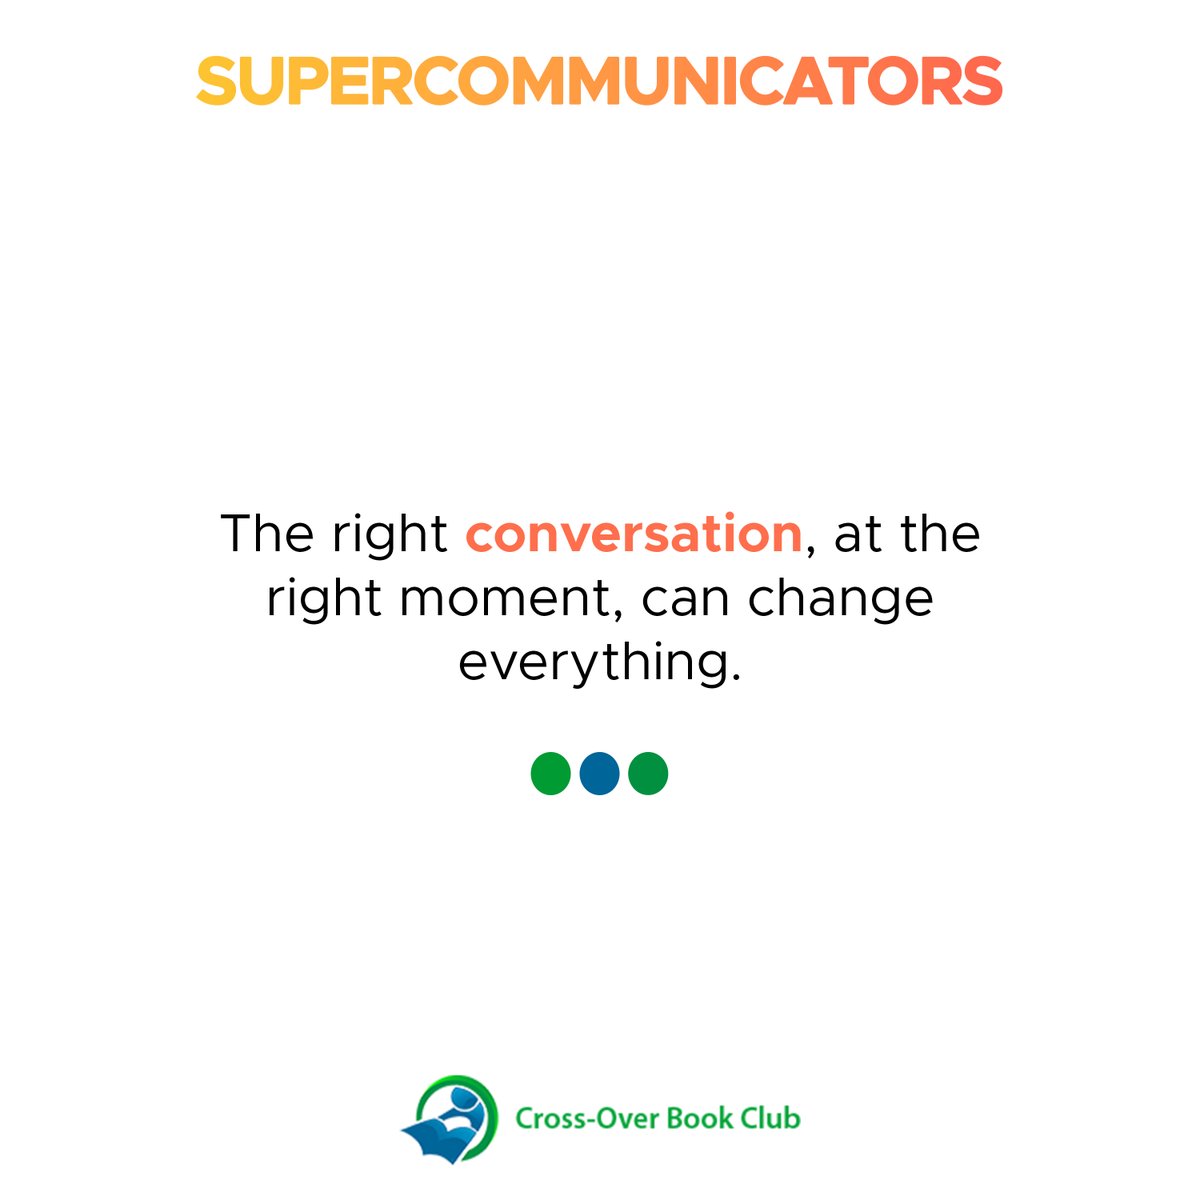 The right conversation, at the right moment, can change everything.

#crossoverbookclub #April #readers #happyreading #supercommunicators #communication #charles #duhigg #book #conversation #choices #right #Moments